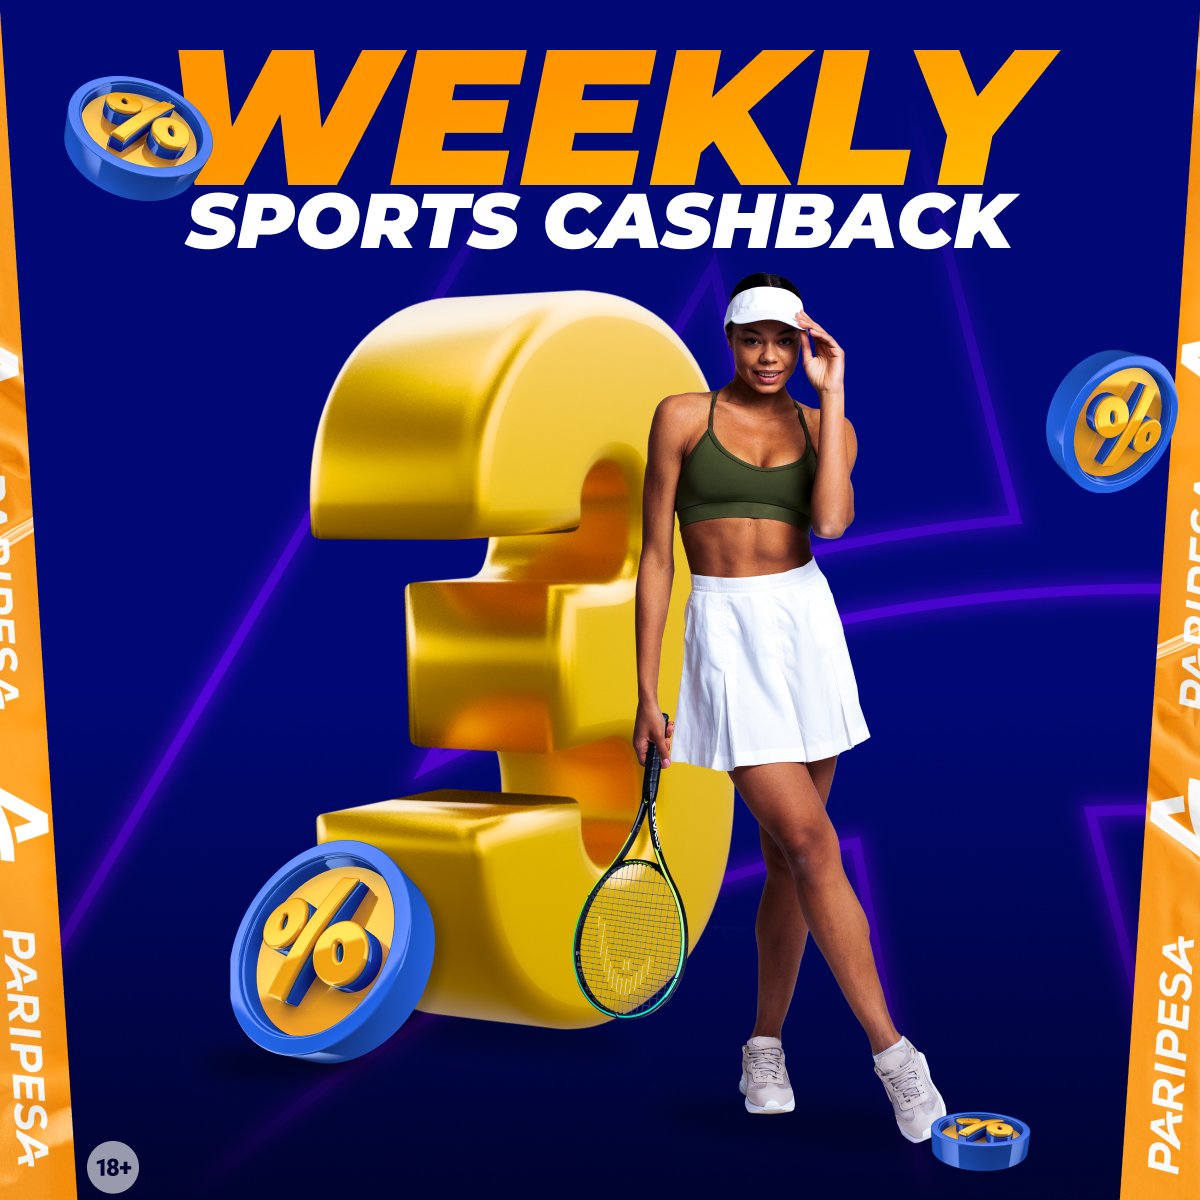 🚨 3% WEEKLY SPORTS CASHBACK 💯 Win even if your bet loses 🔊 A bonus of 3% of your losing bets is awarded every week at 12:00 (GMT) on Tuesday. All terms & conditions: m.paripesa.bet/k7x #weeklycashback